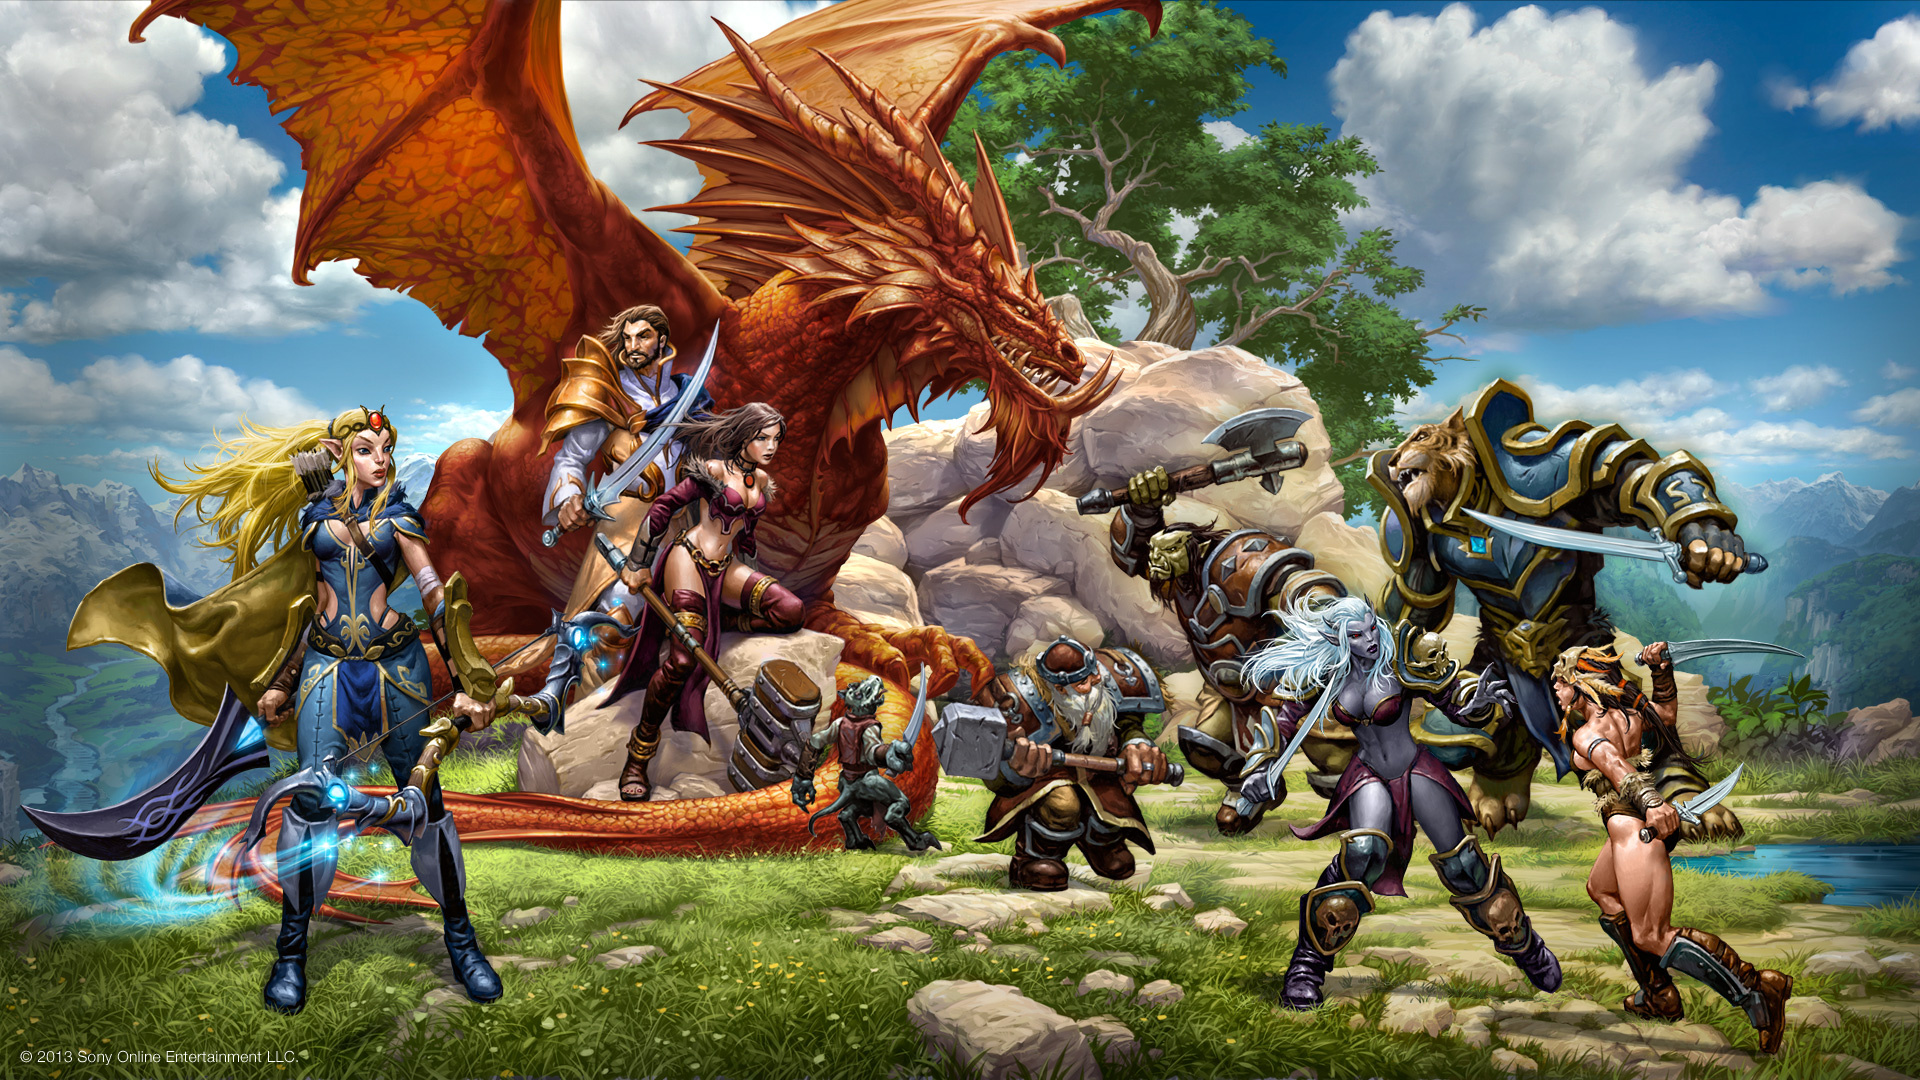 EverQuest Next, Role-playing game, Epic adventure, HD wallpapers, 1920x1080 Full HD Desktop